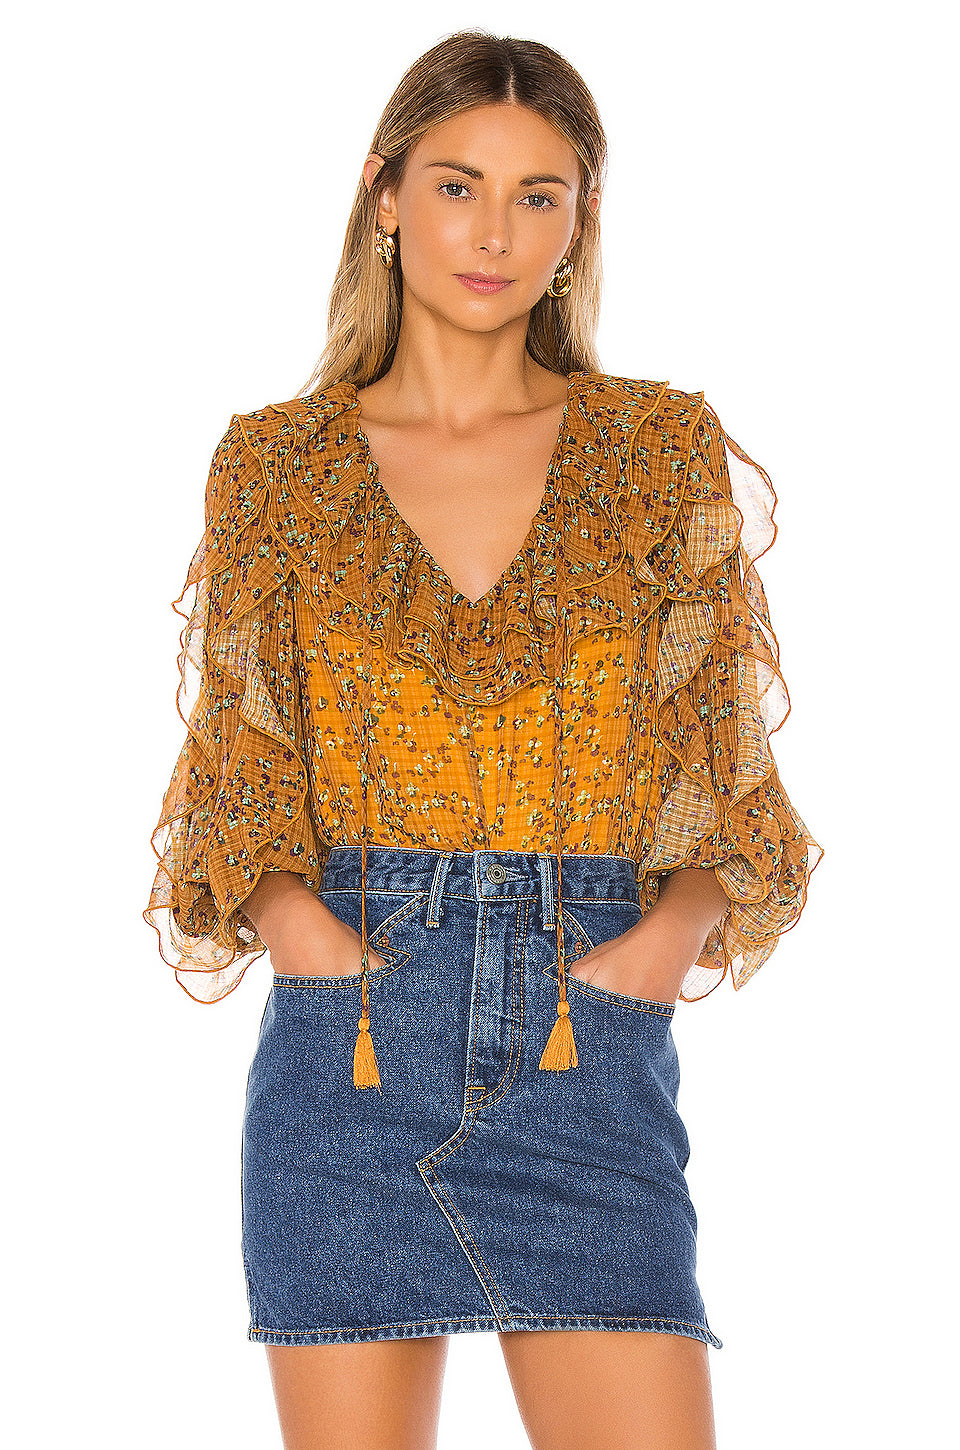 Claire Blouse in MUSTARD FLORAL